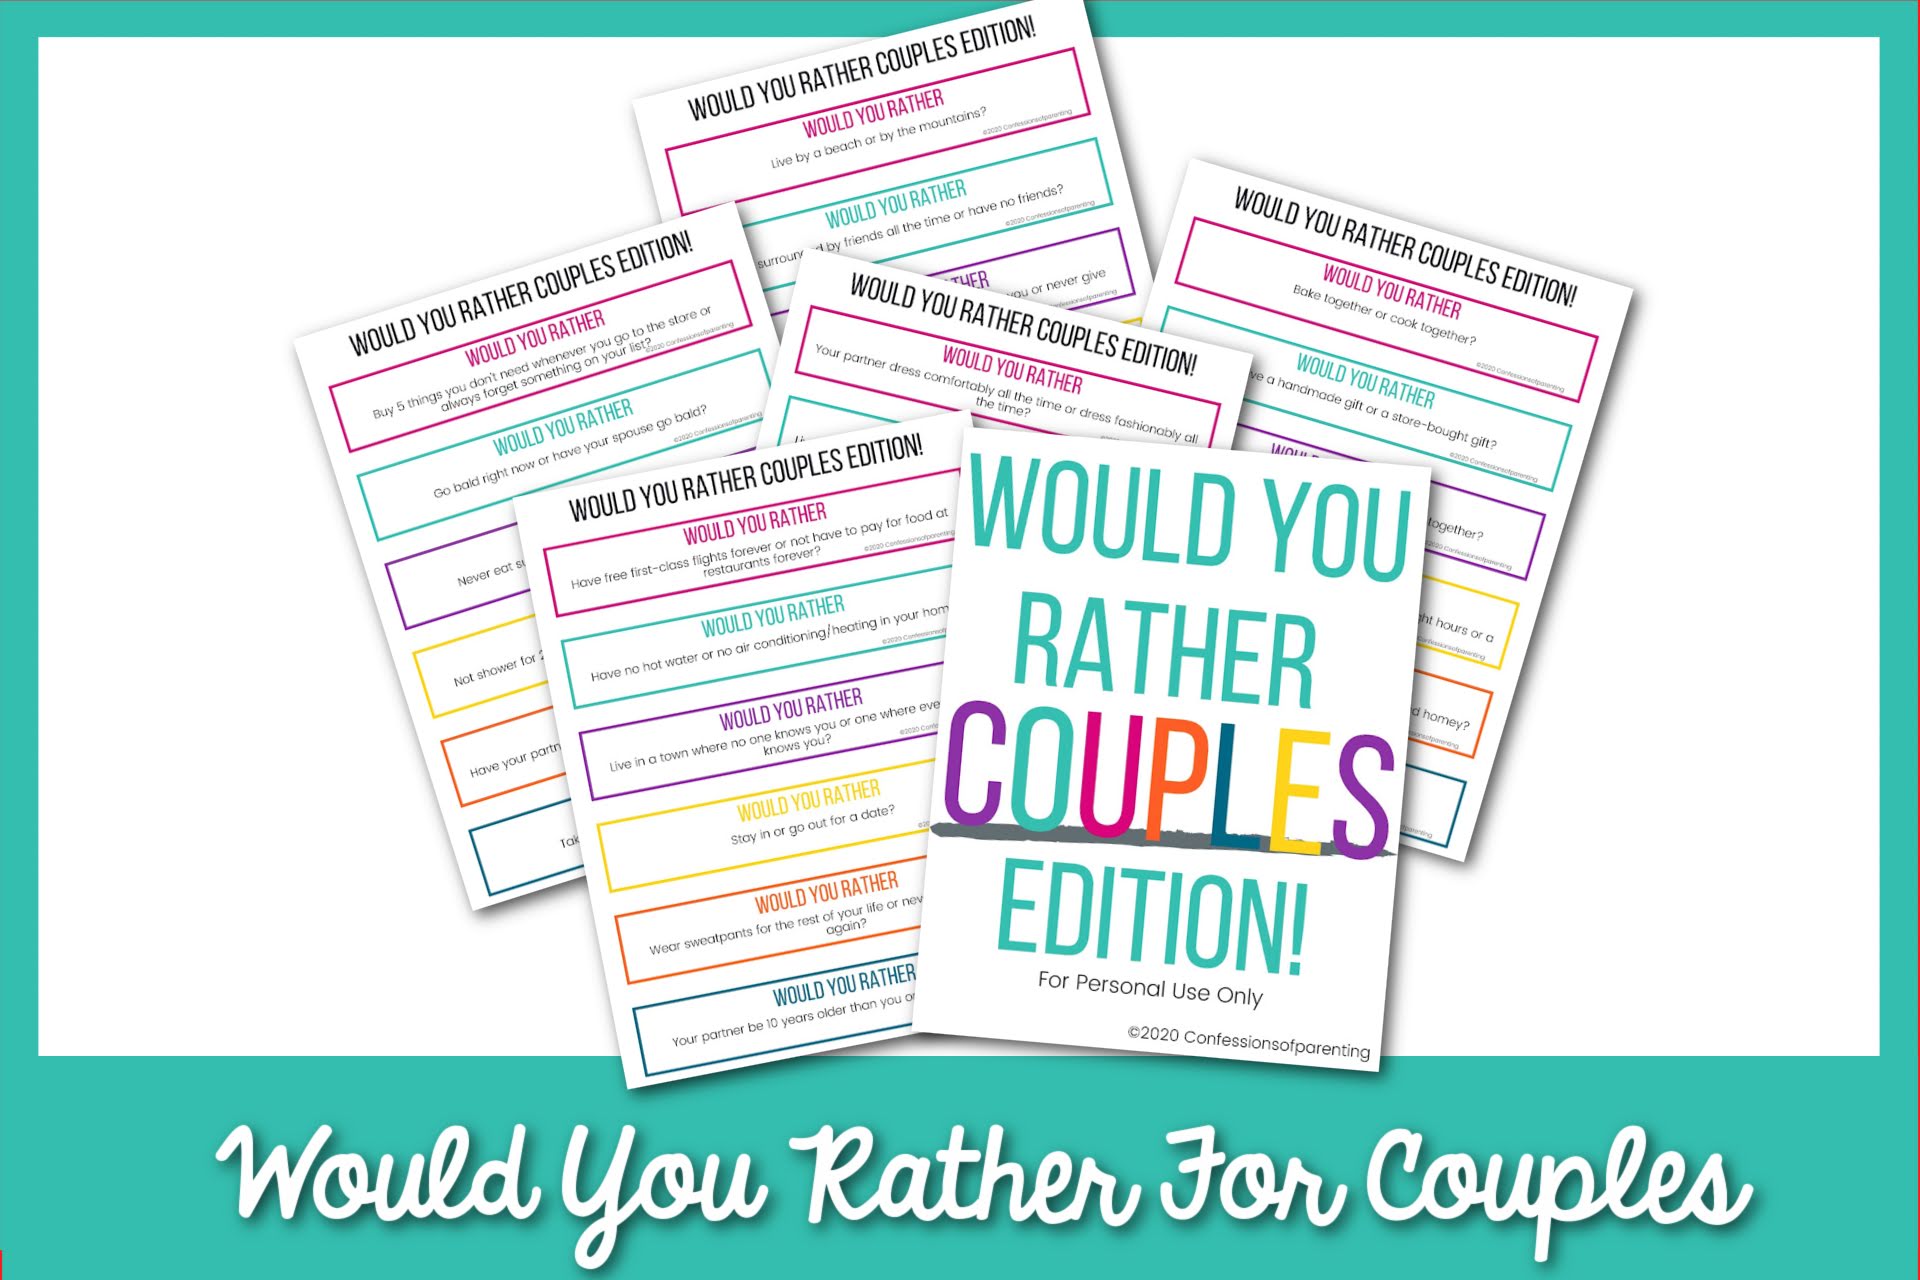 100 Would You Rather Questions for Couples